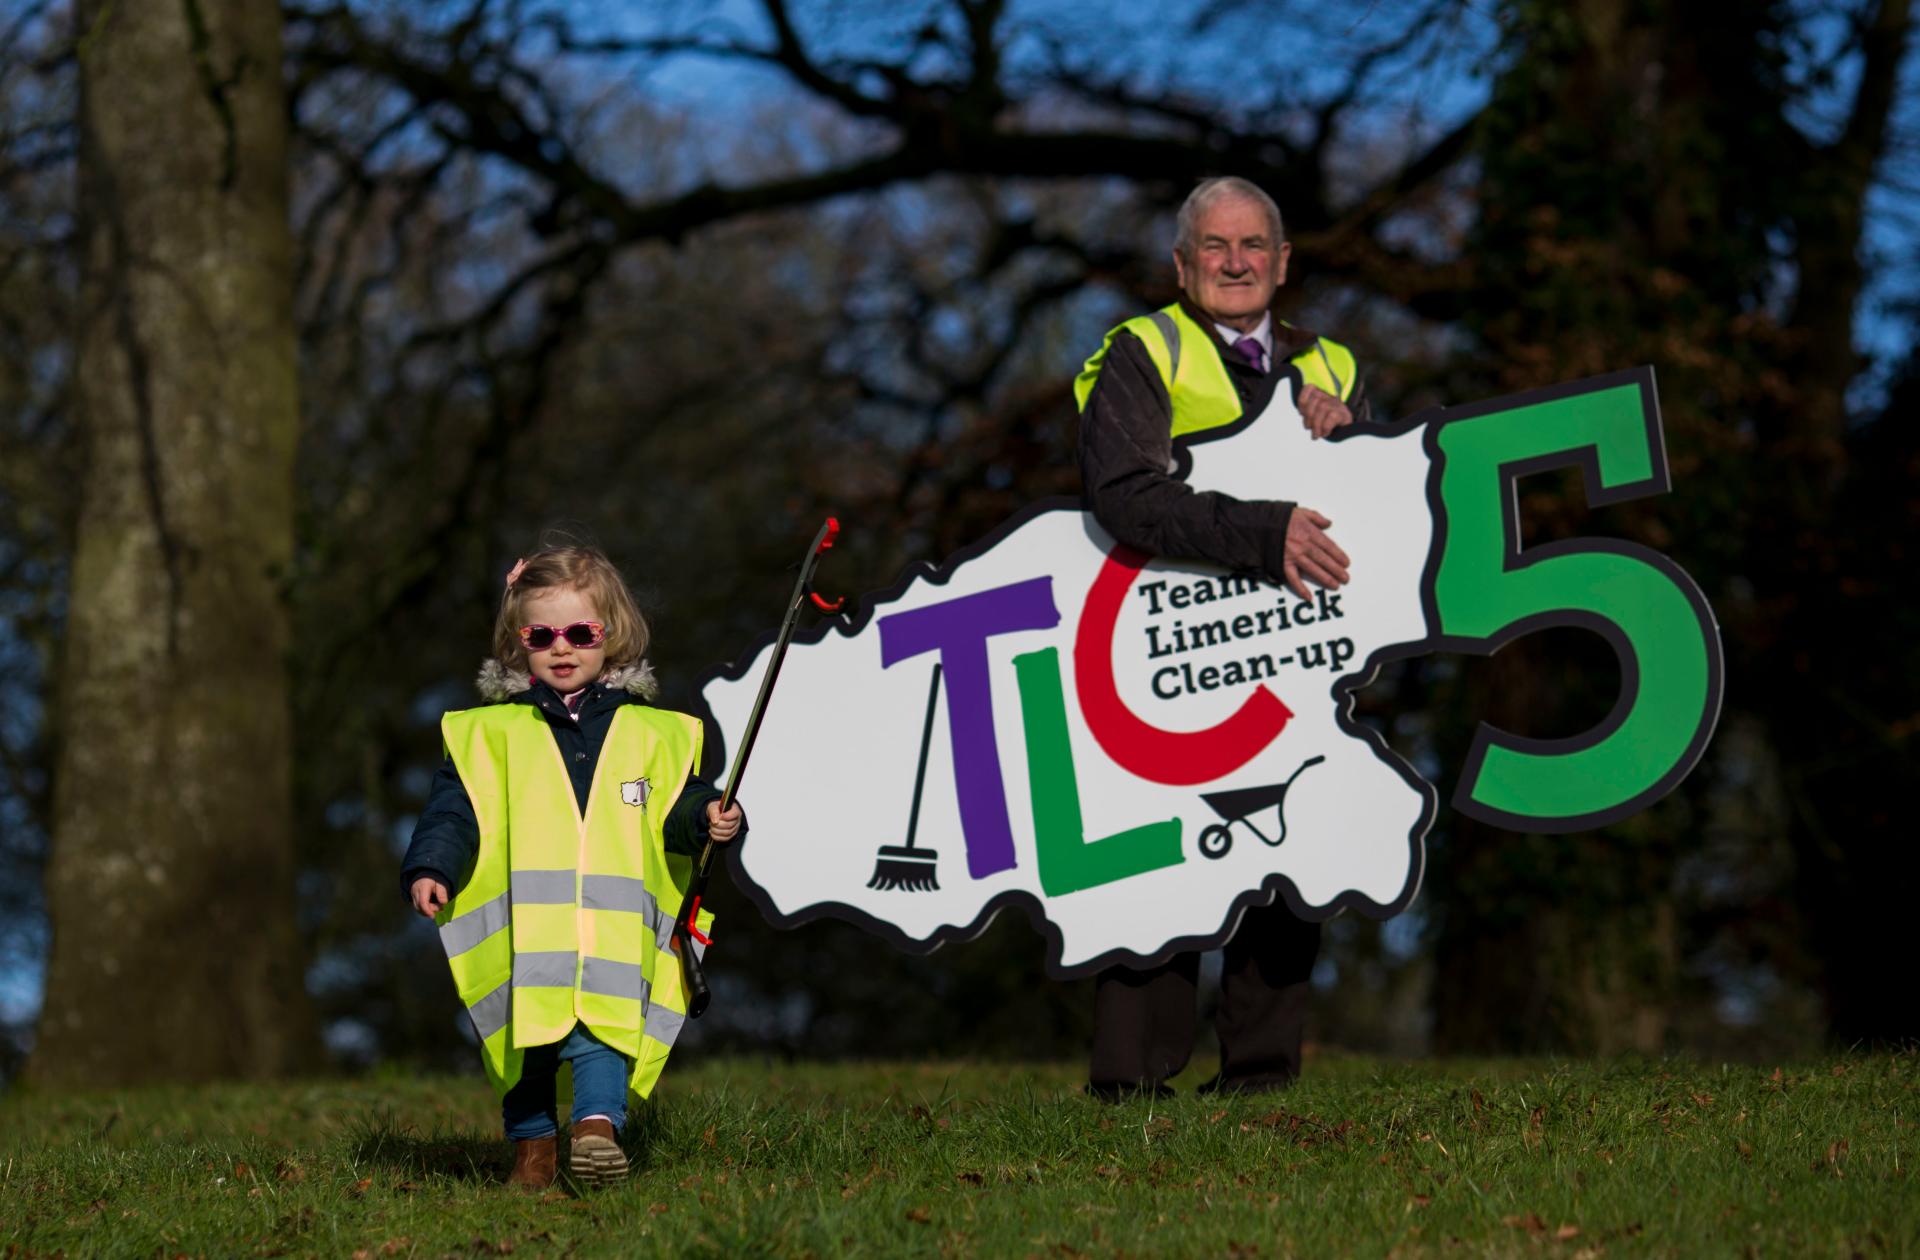 A man and small girl launch TLC5